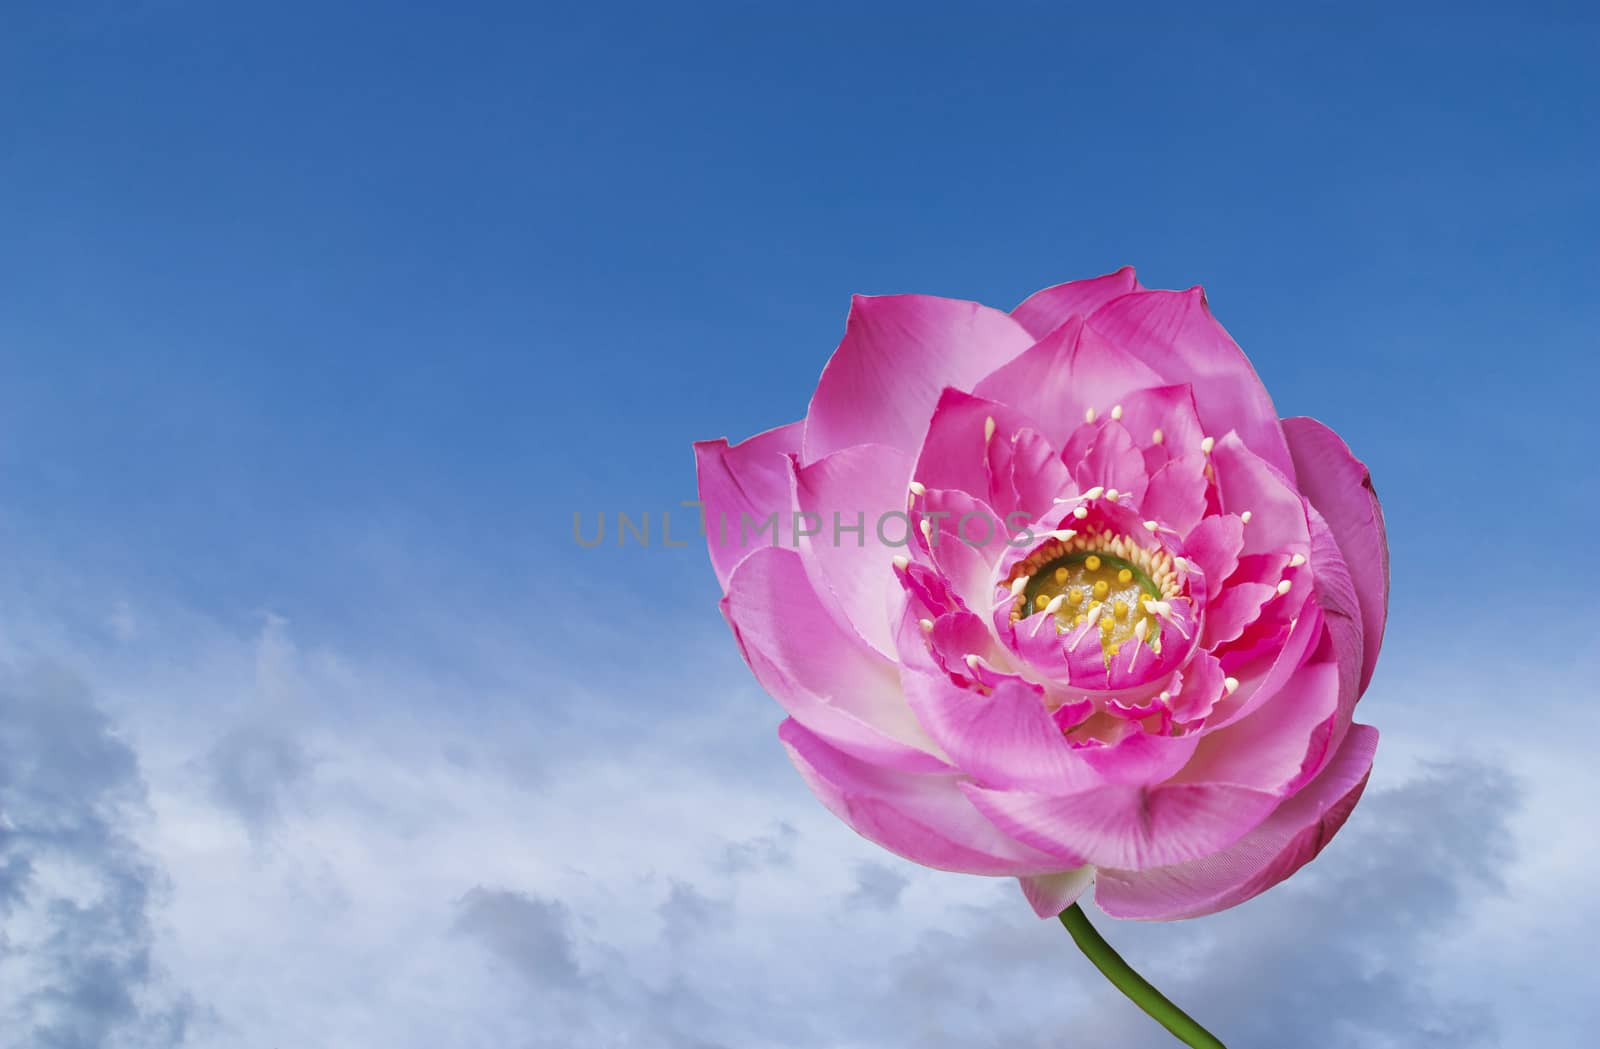 Pink lotus with blue sky by jimbophoto